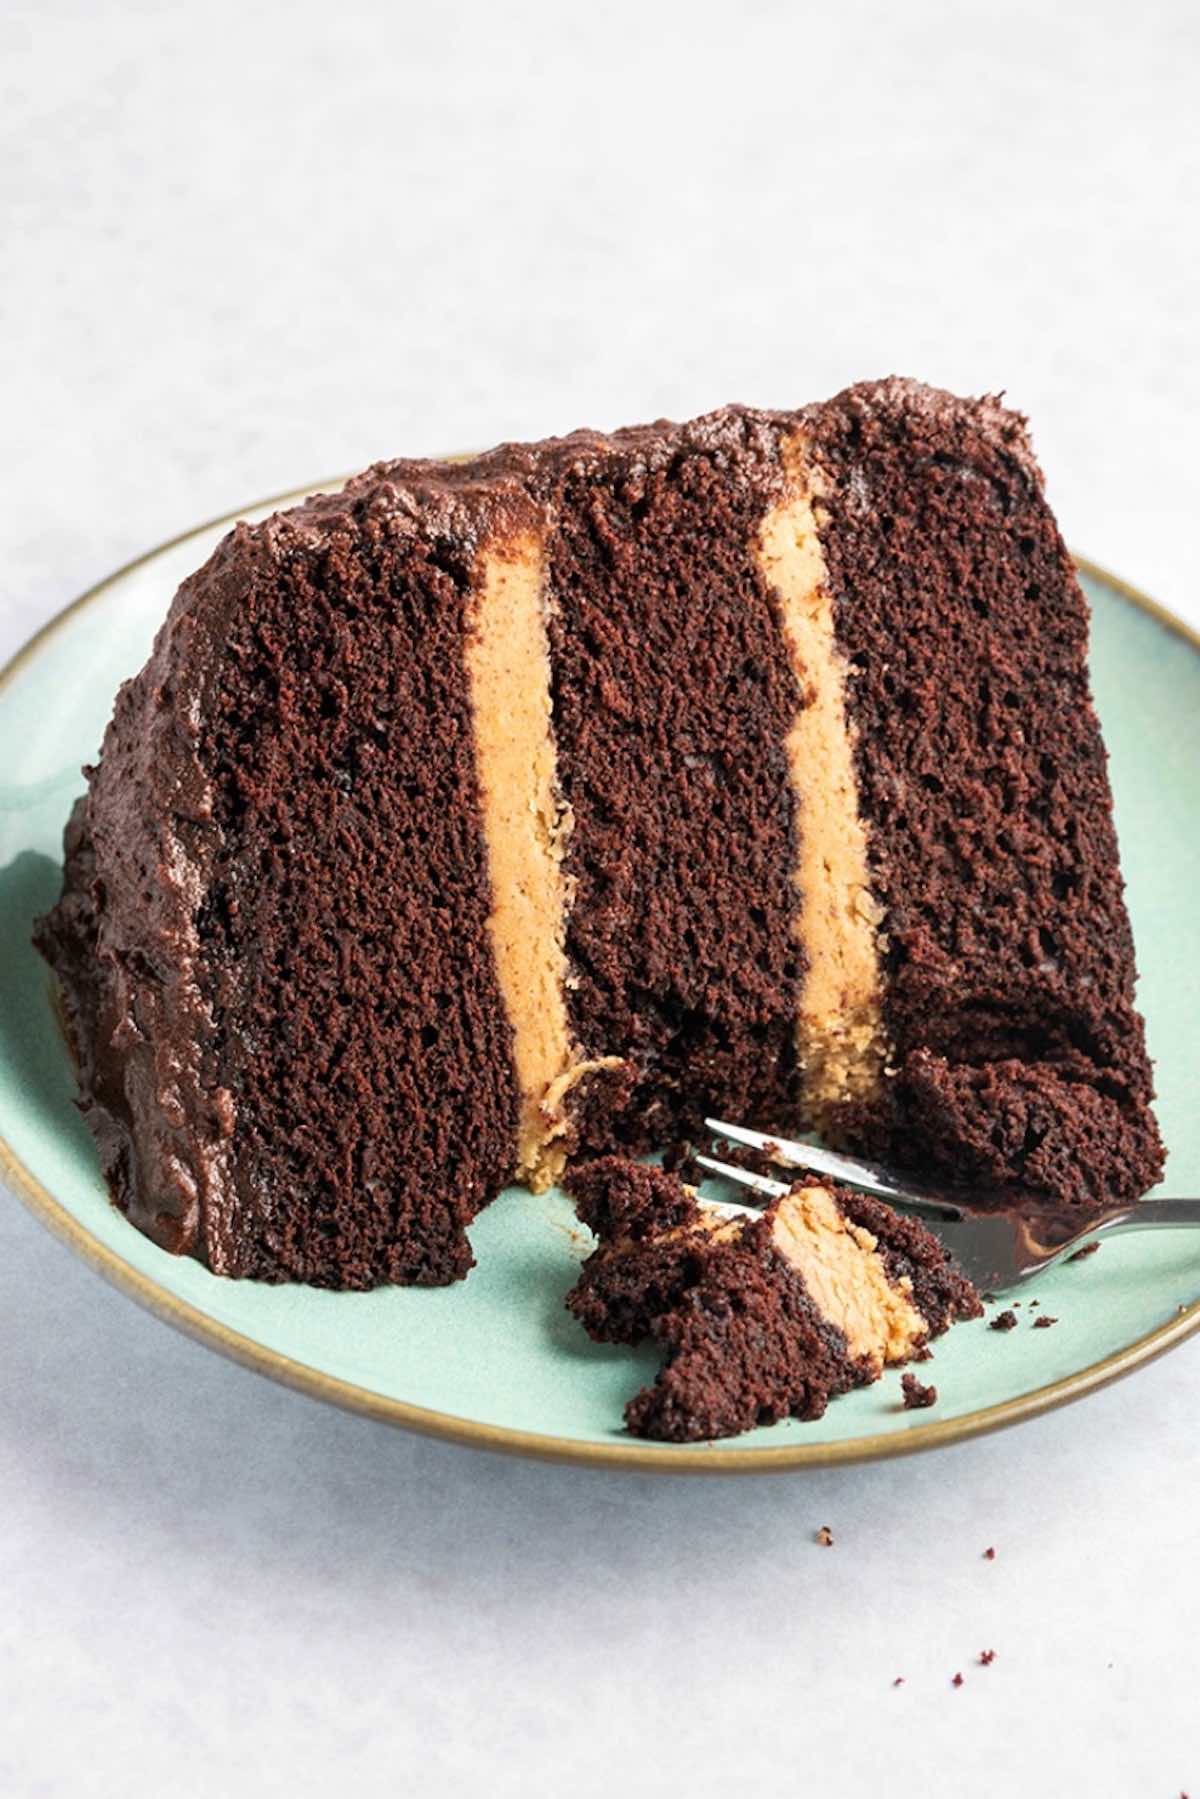 chocolate cake with peanut butter frosting.